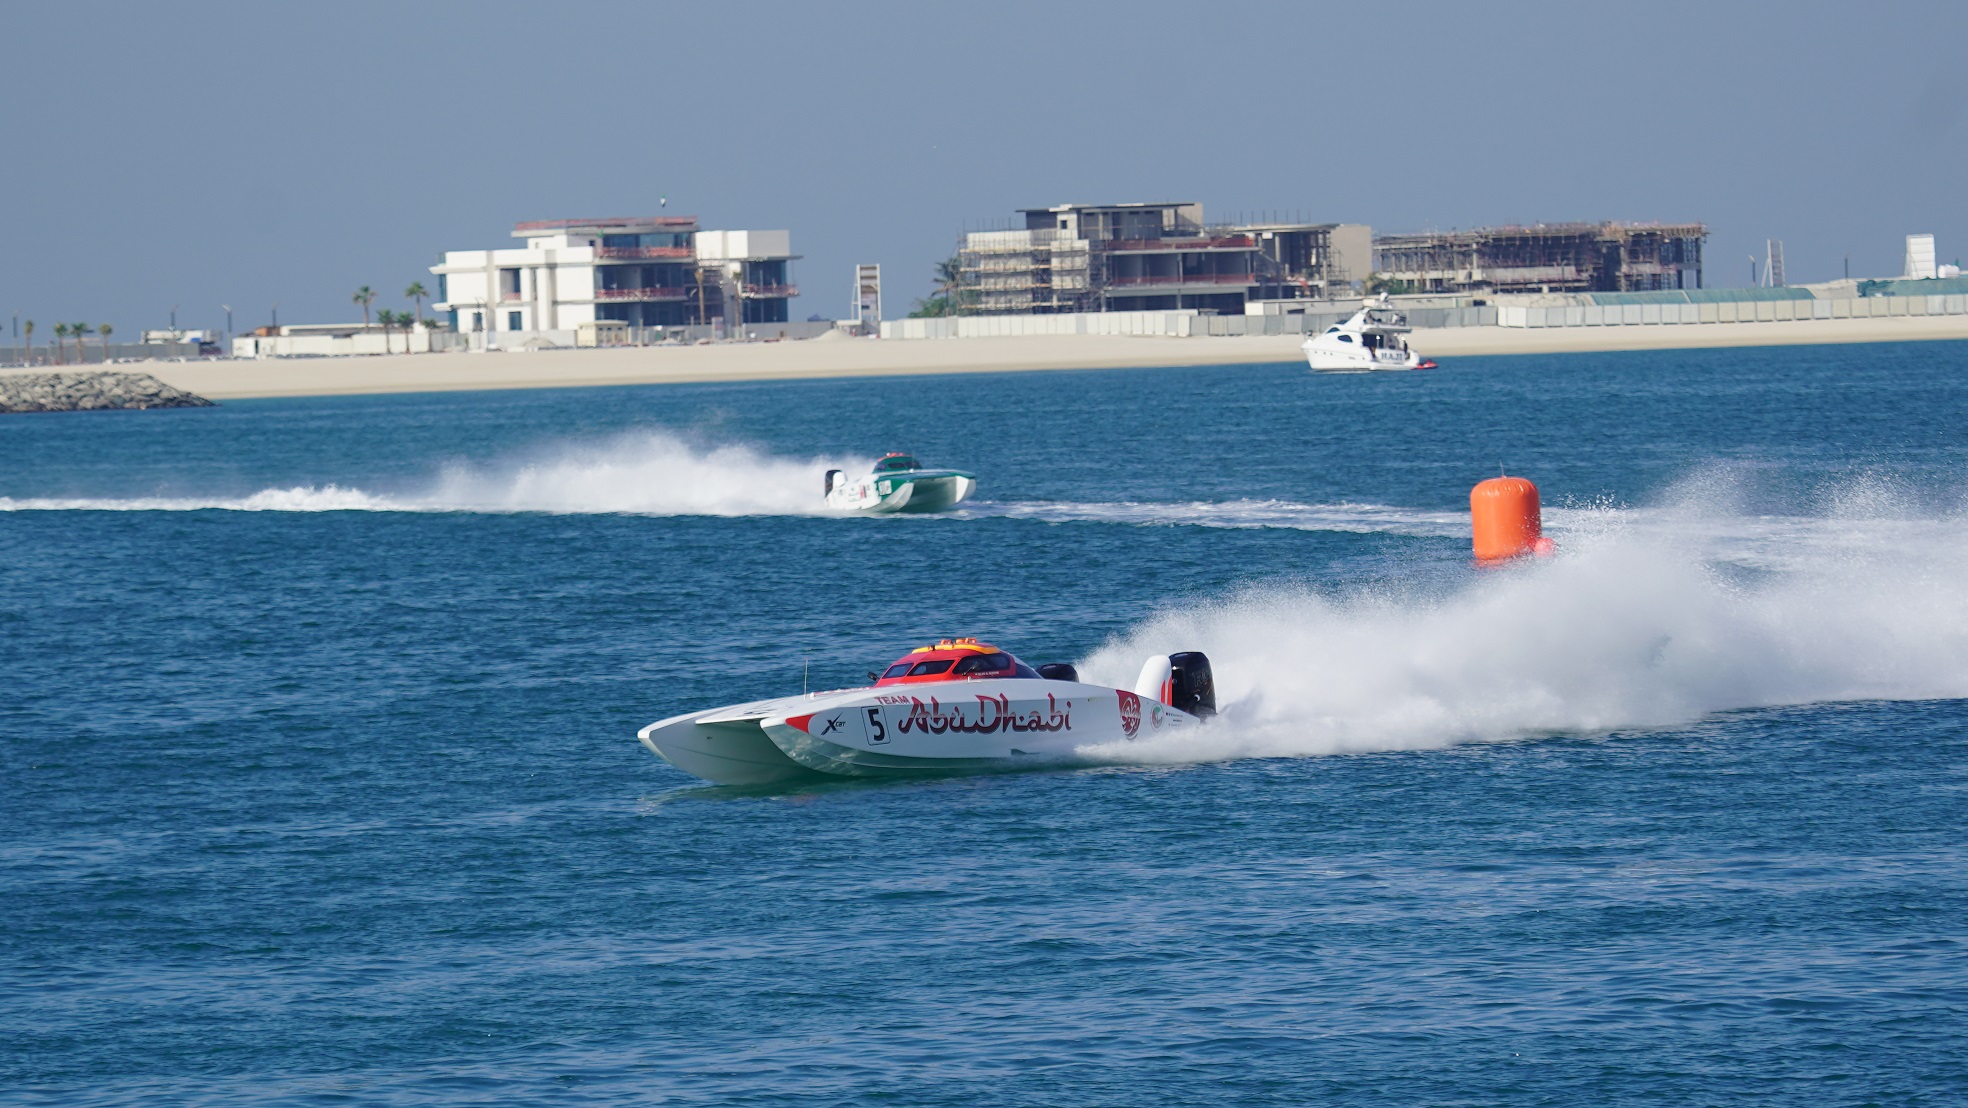 DUBAI POLICE CLOSE TO XCAT CROWN AFTER HALTING TEAM ABU DHABI’S VICTORY CHARGE